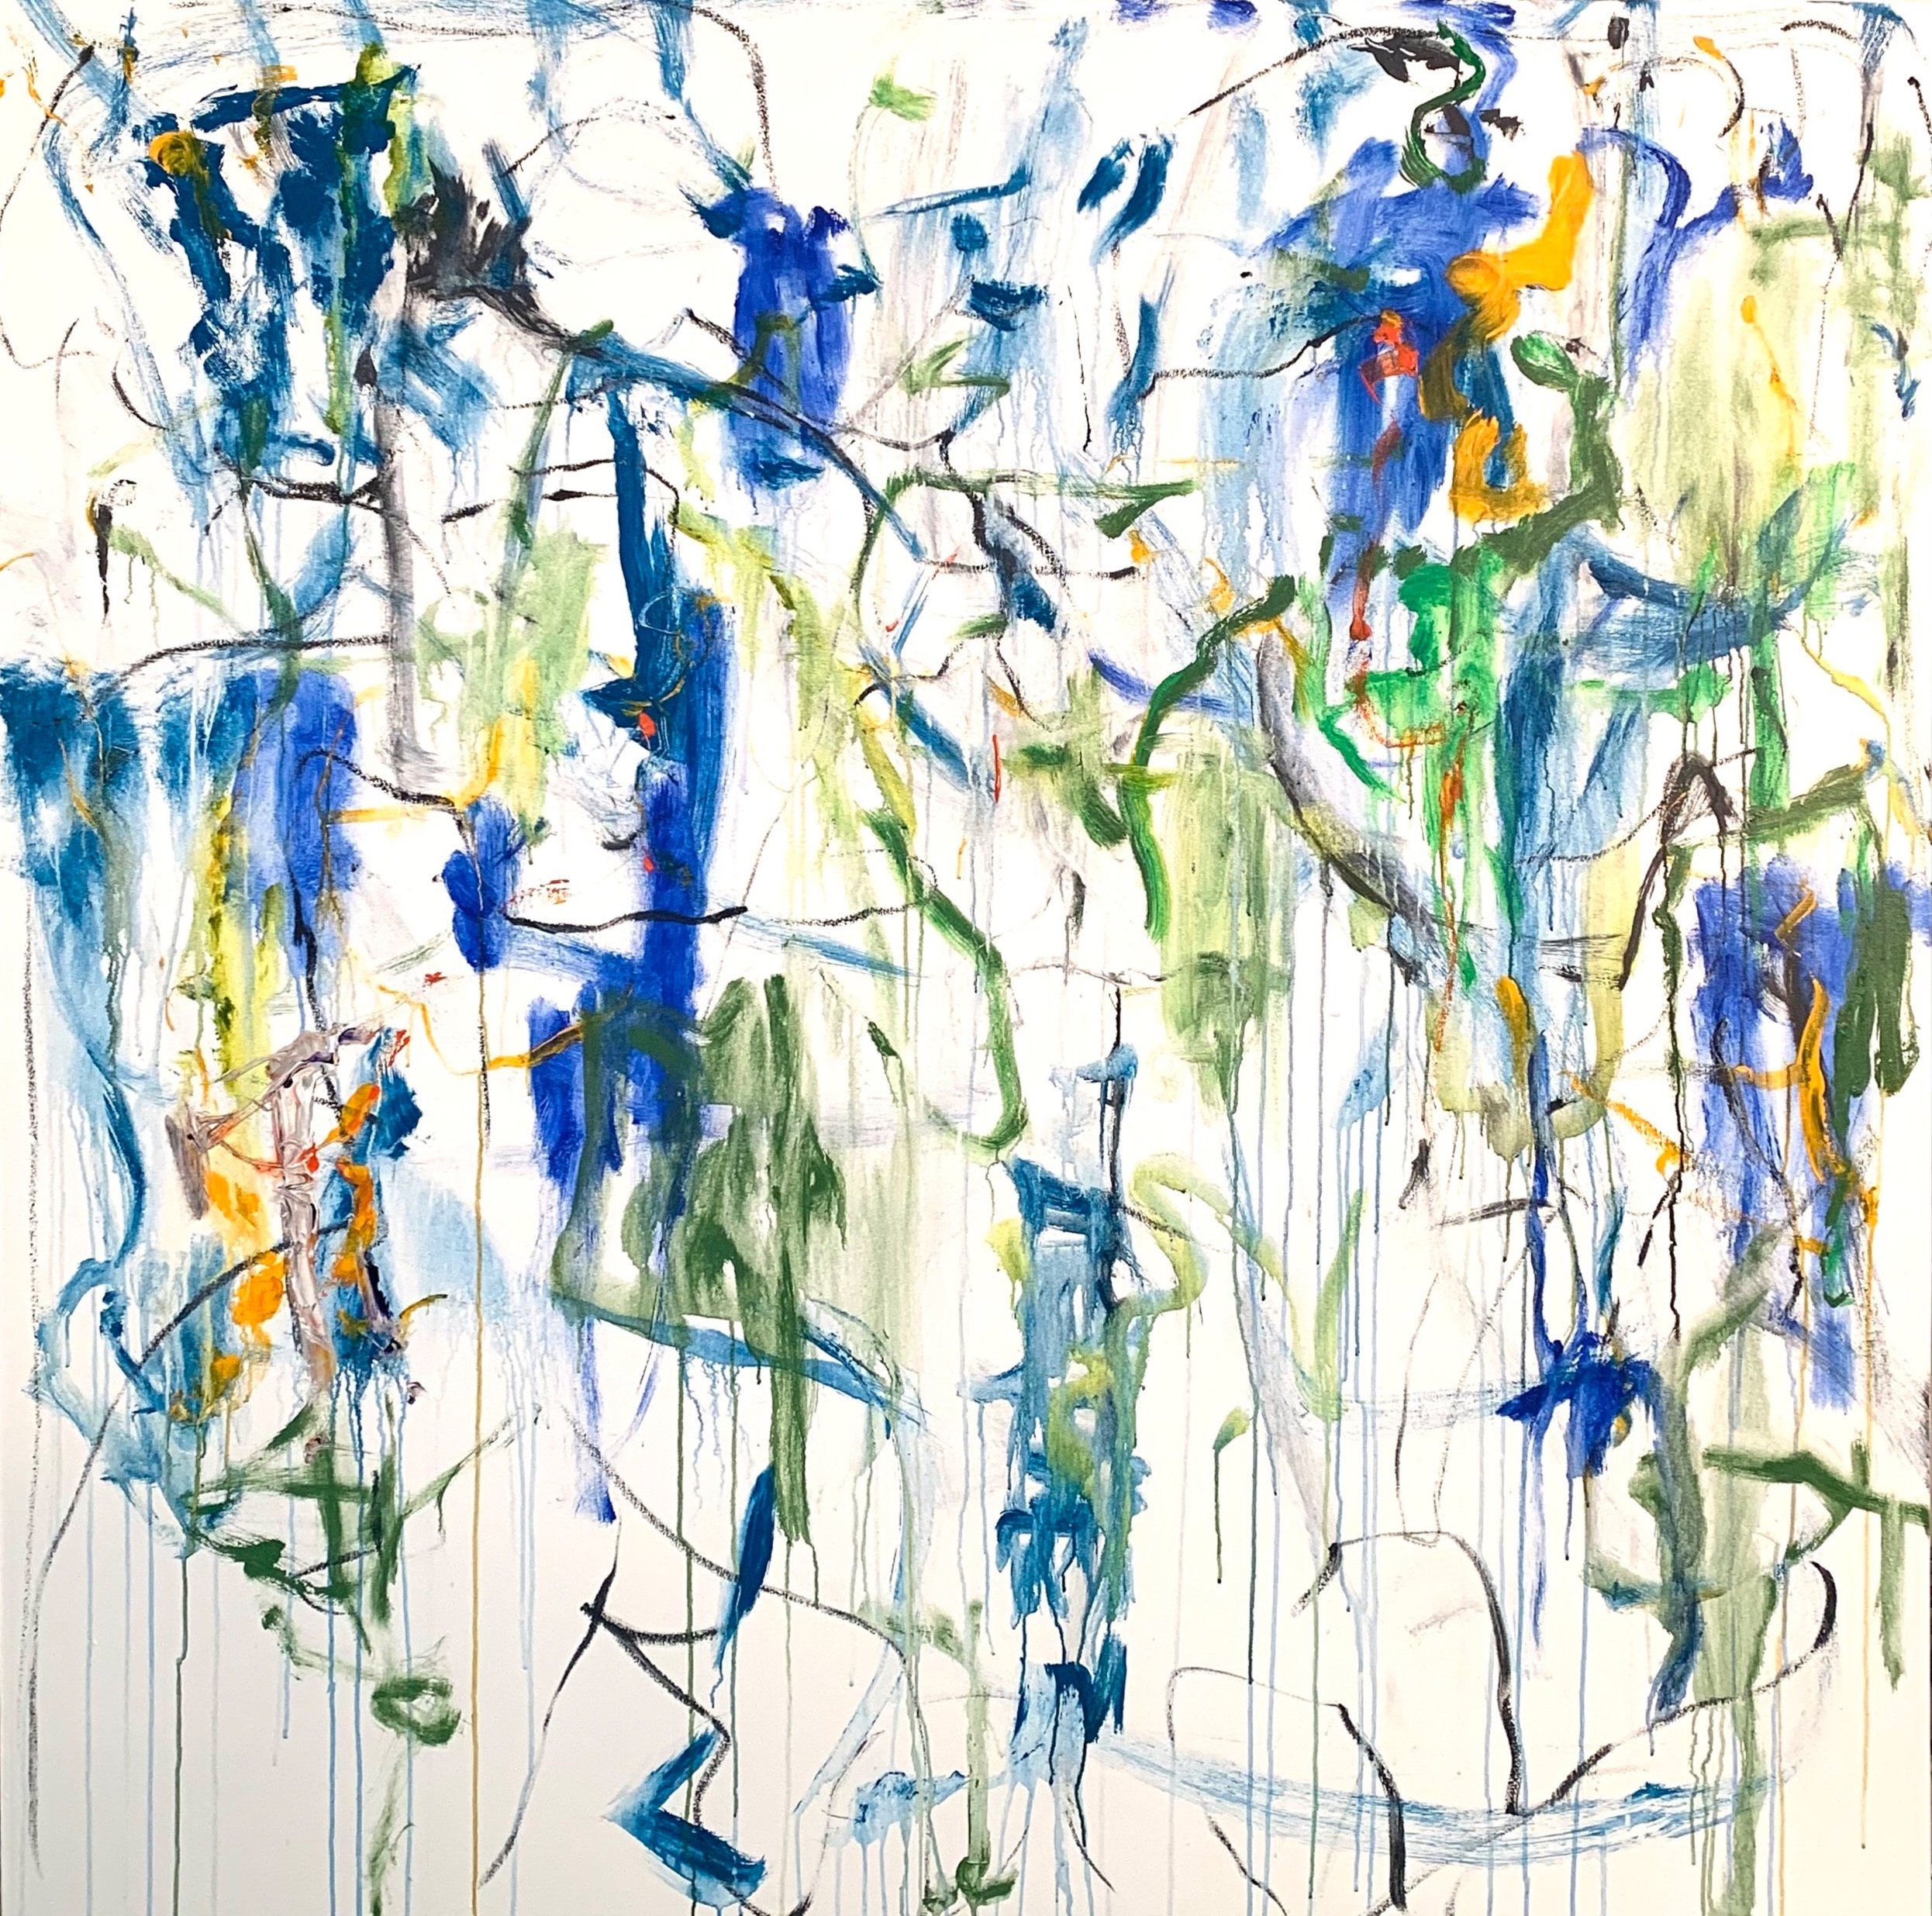 “Opening No. 177,” acrylic, ink, oil stick on canvas, 72”x72”